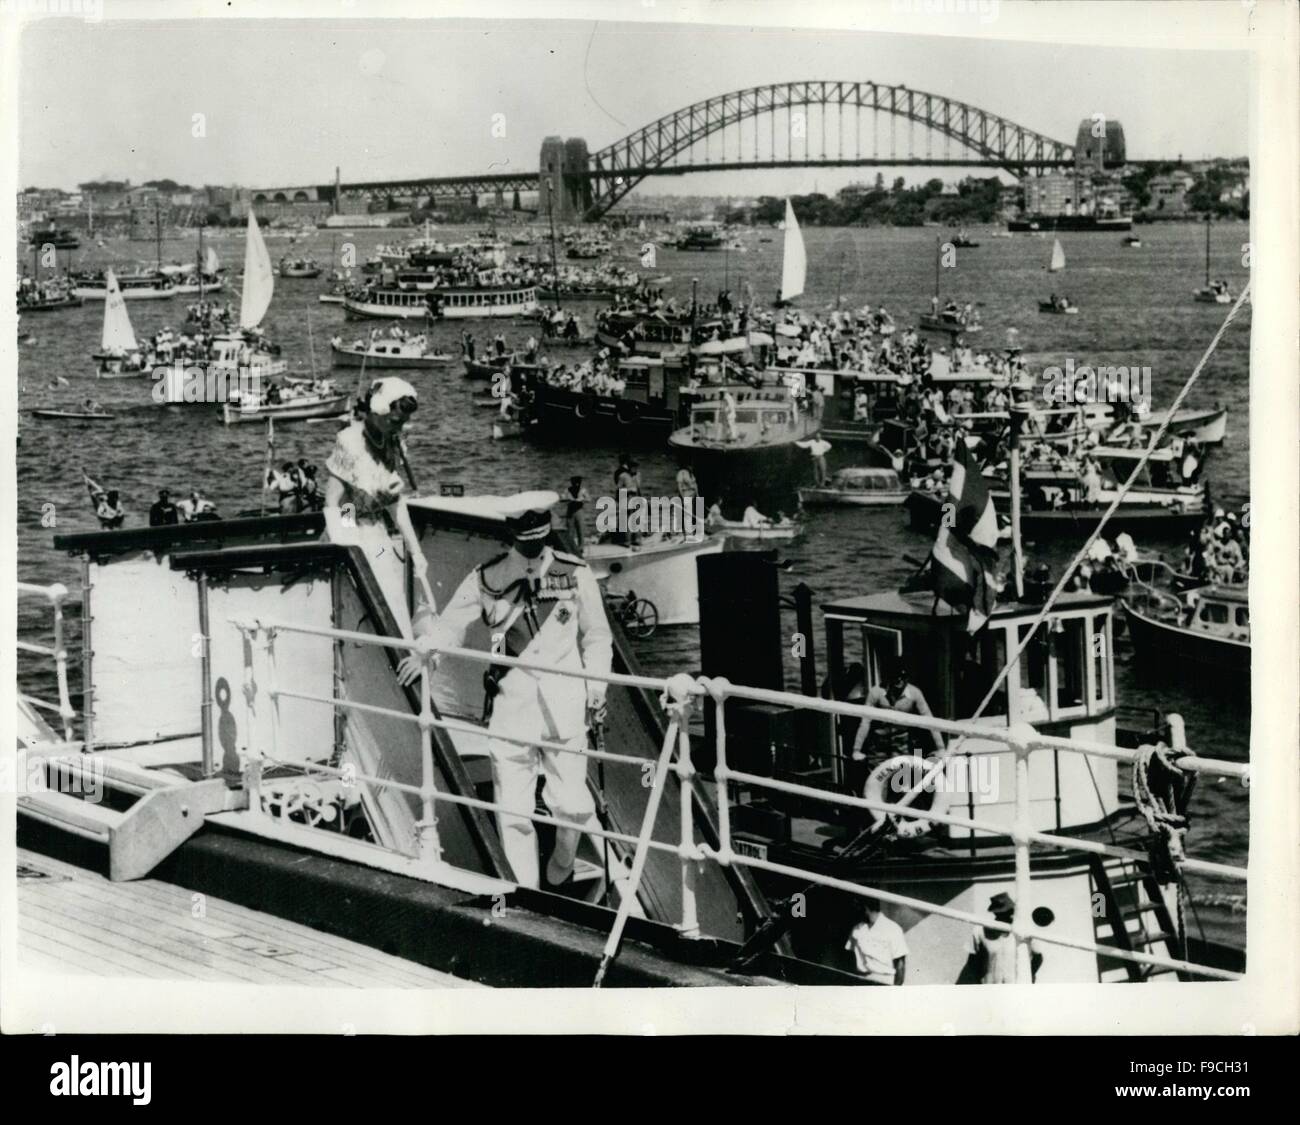 1964 - Queen And The Duke Of Edinburgh Arrive In Australia. Boats In The Harbour: A million Australians gathered in Sydney, Australia - today to greet H.M. The Queen and the Duke of Edinburgh when they arrived aboard the liner Gothic from New Zealand. They were met on the quayside by Field Marsgal Sir William Slim the Givernor General of Australia. Photo Shows: The Queen precedes the Duke Of Edinburgh who wears uniform of Admiral of the Fleet - as they step down the gangway of the liner Gothic on arrival in Sydney Harbour. Section of the famous Sydney Harbour Bridge can be see in the backgro Stock Photo